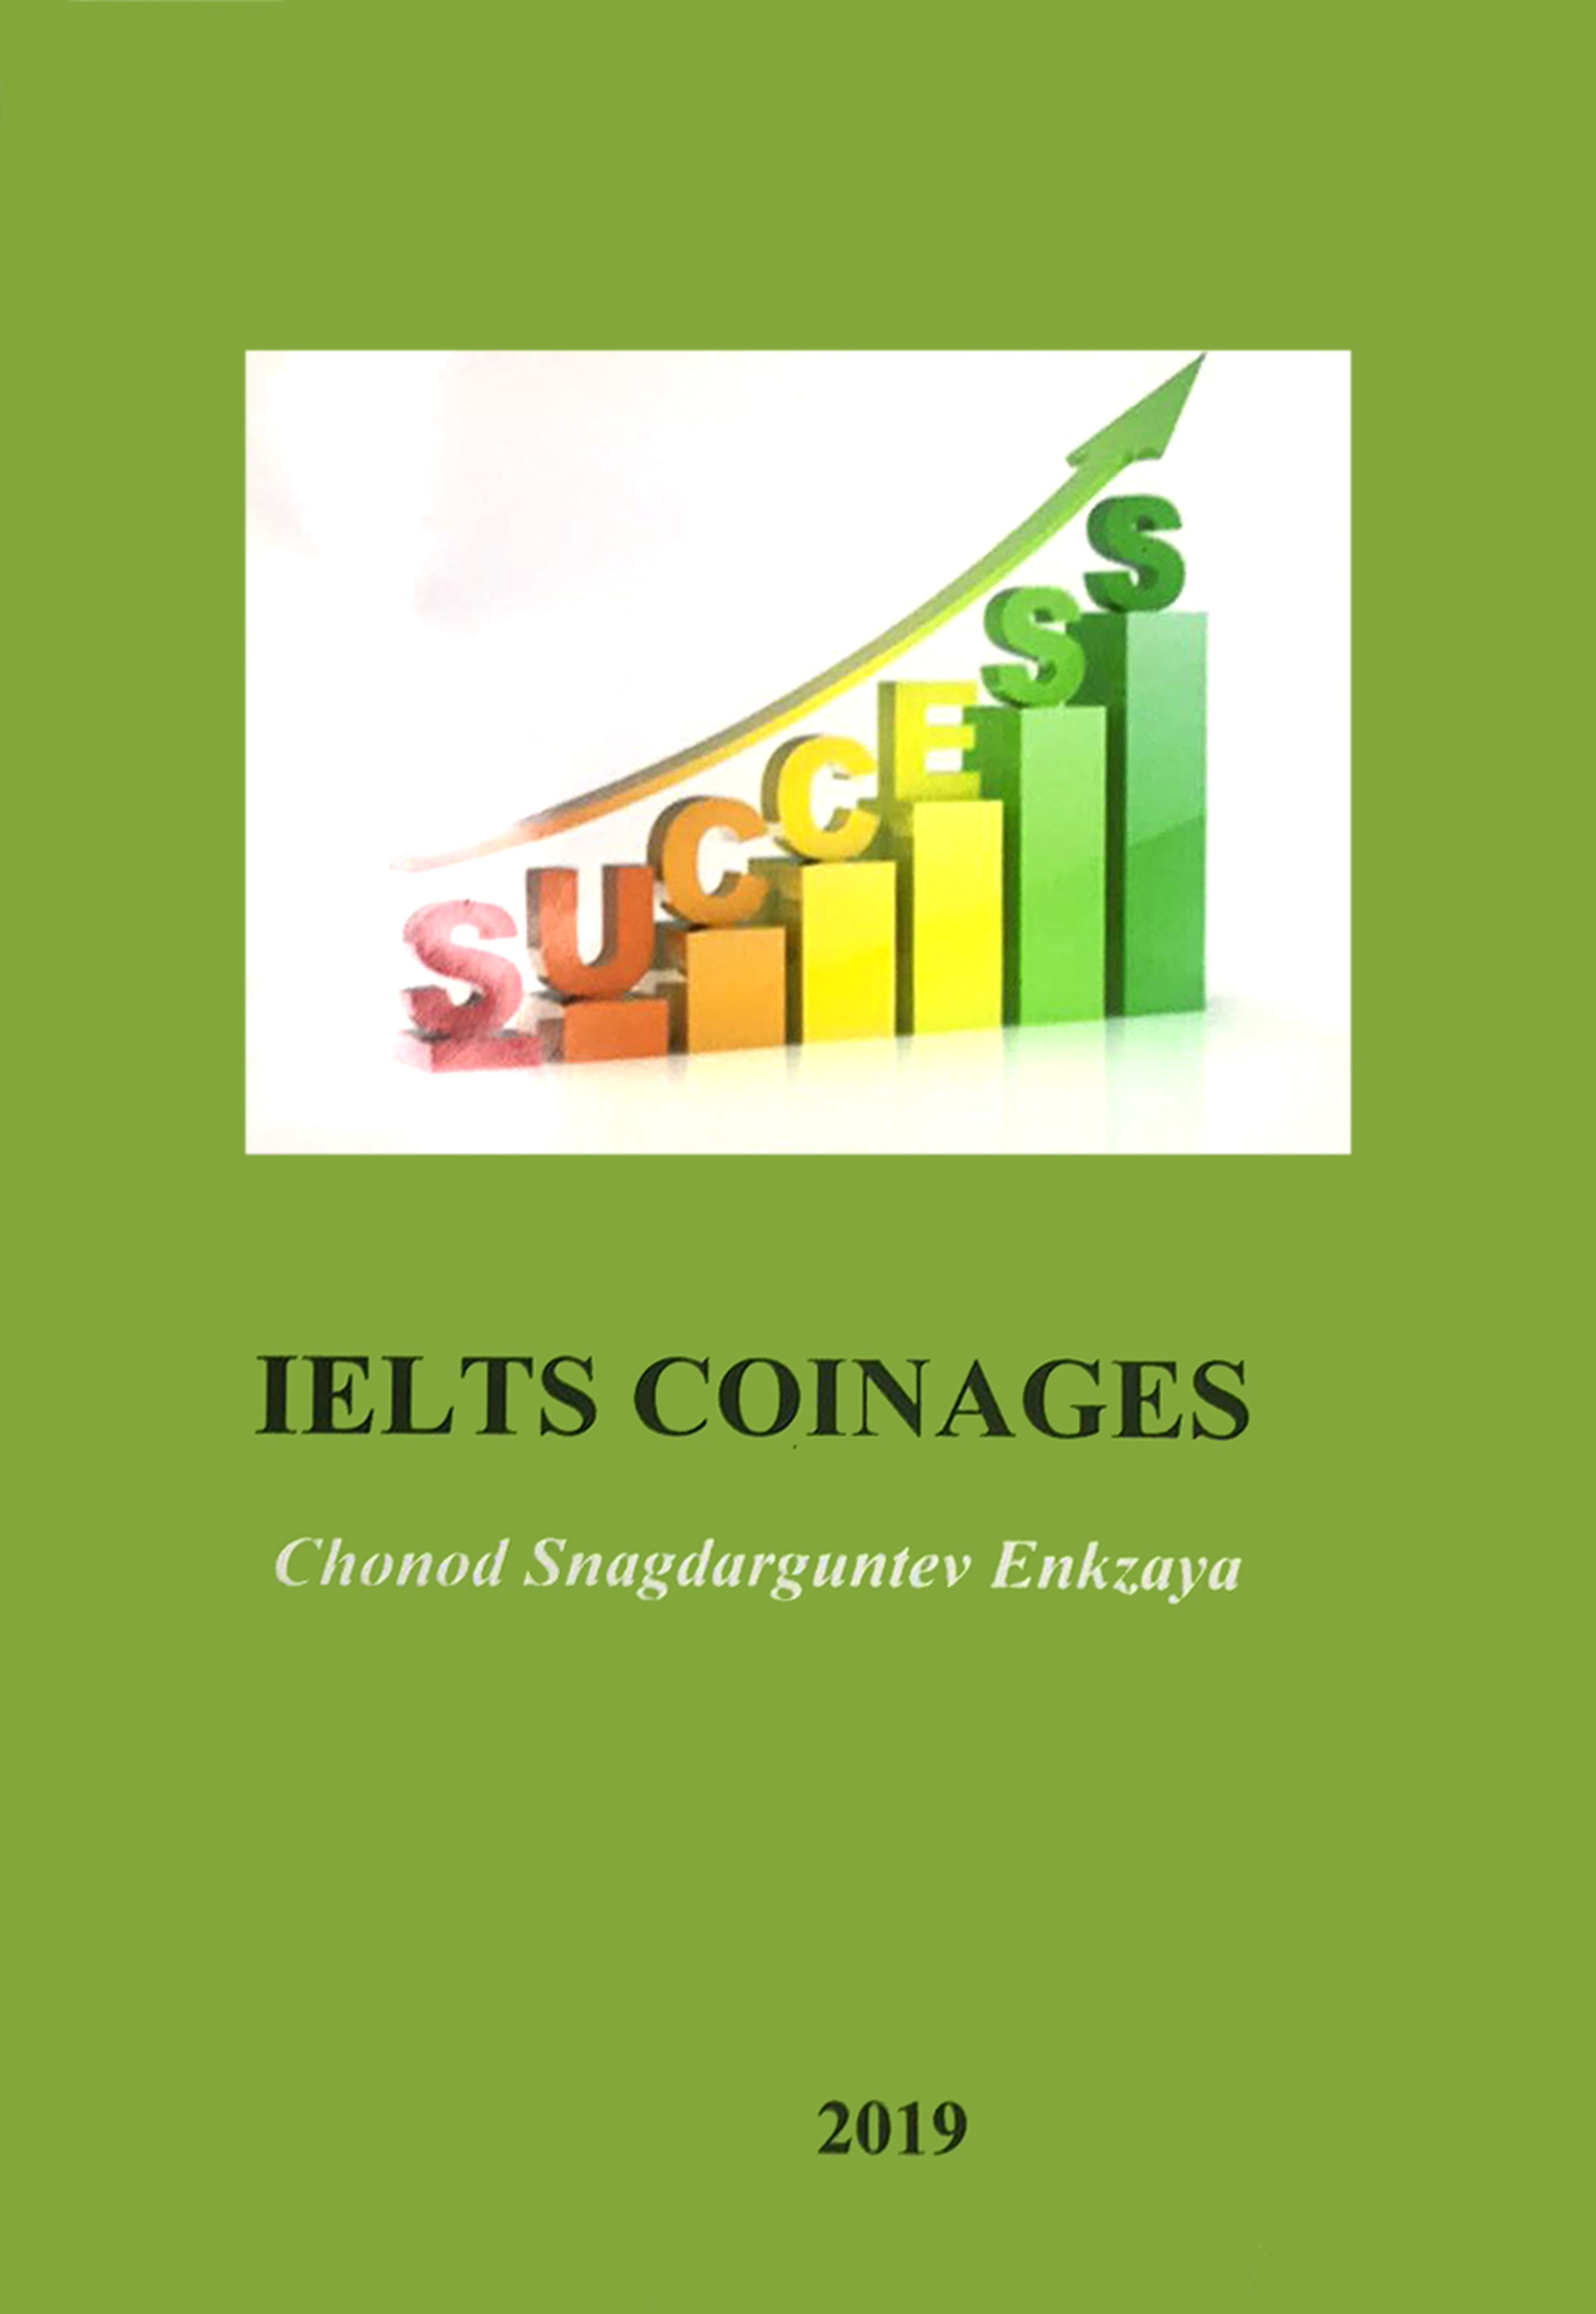 IELTS coinages